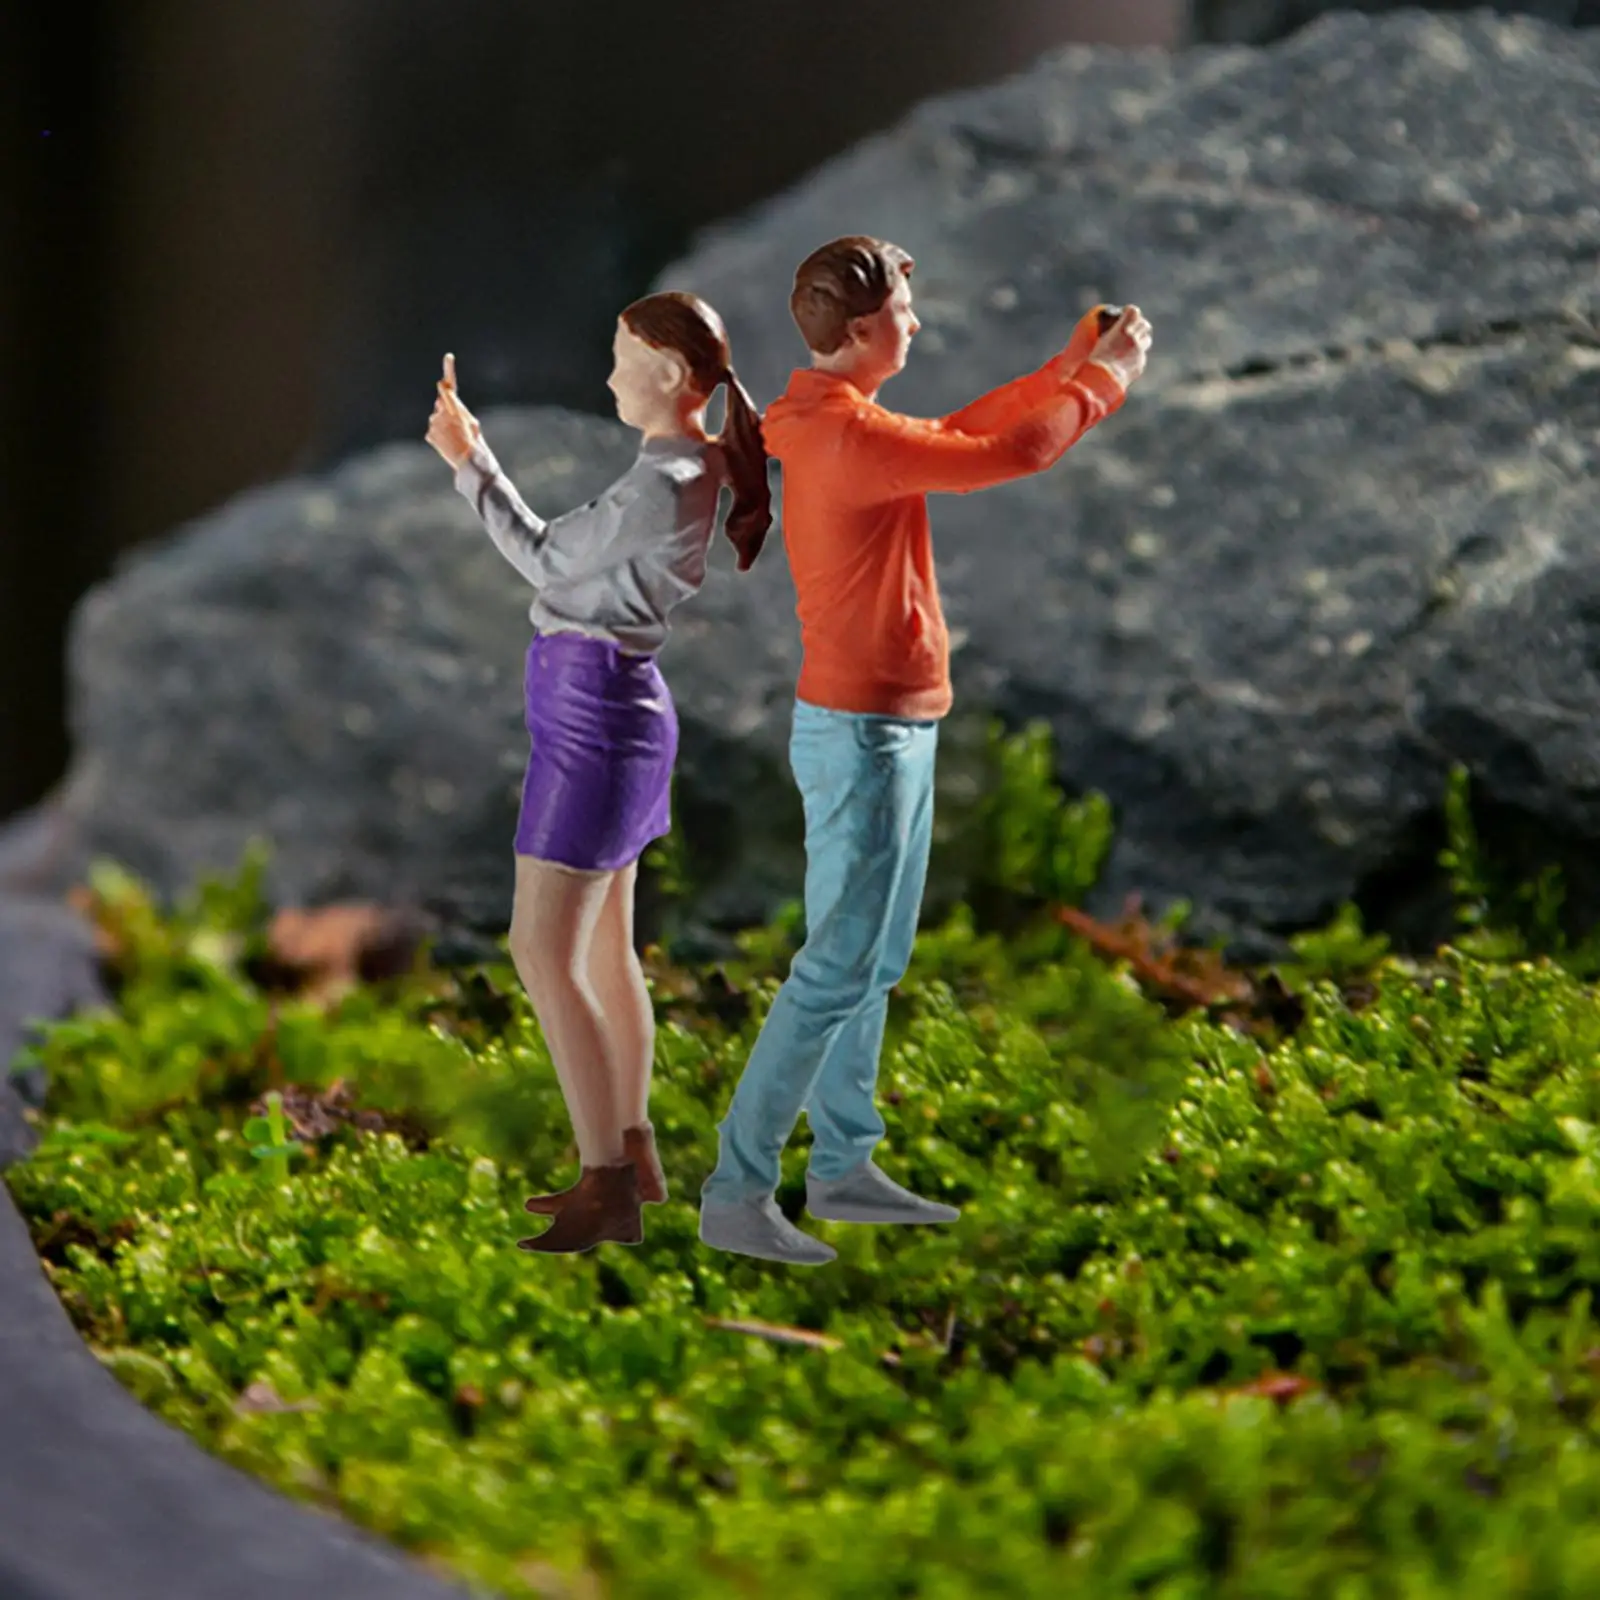 2x 1/64 Couple Figures Photo Props Figurines Model Trains People Figures for Micro Landscapes Photography Props Dollhouse Layout